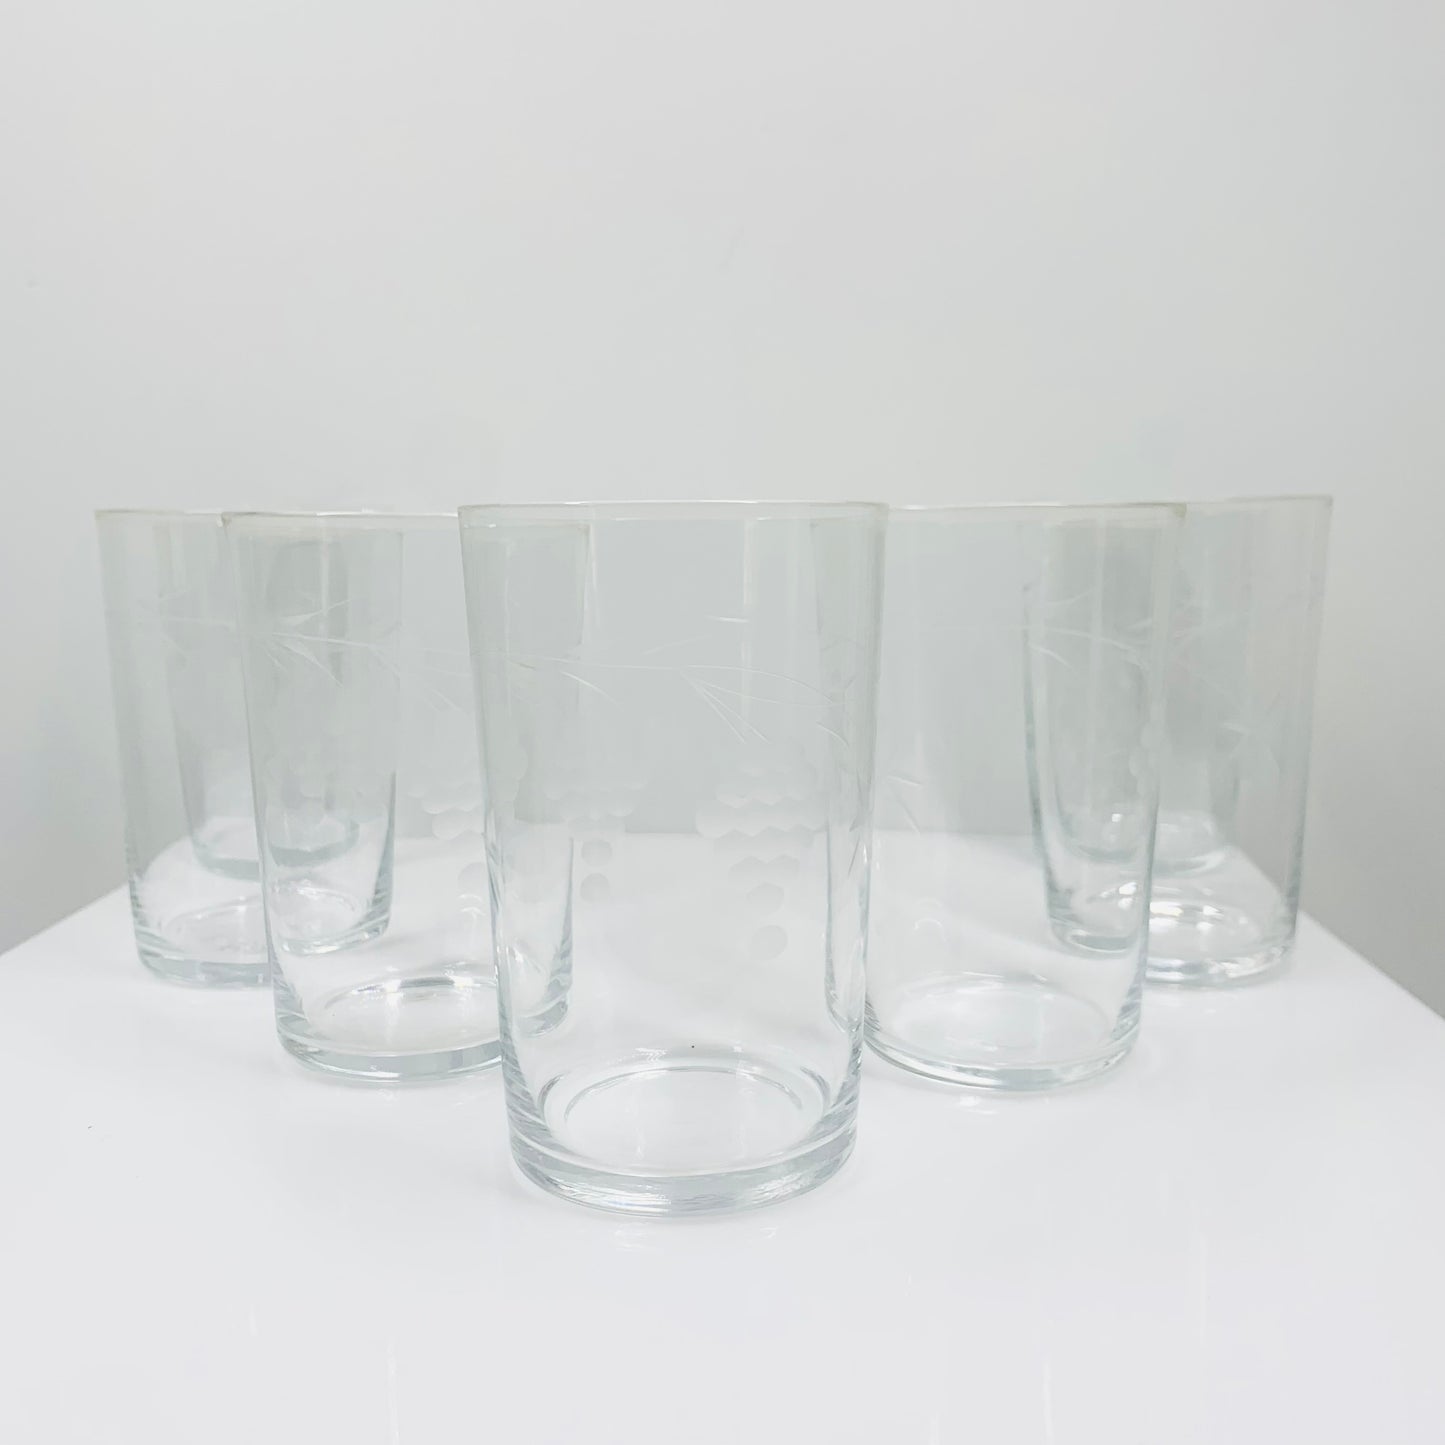 1940s hand etched glass tumblers